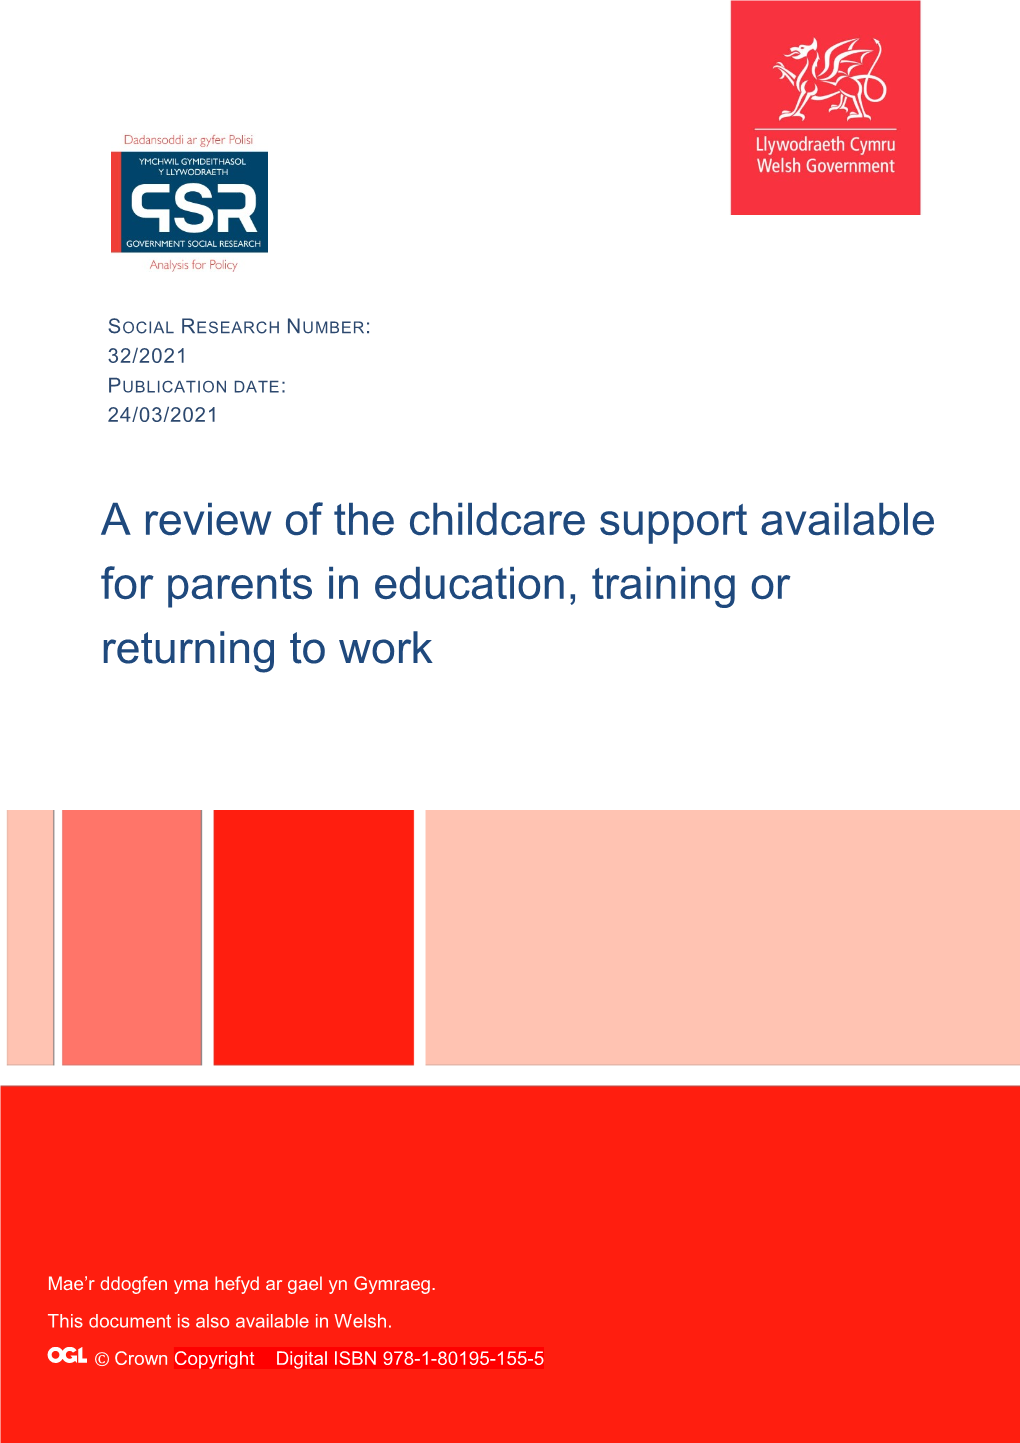 A Review of the Childcare Support Available for Parents in Education, Training Or Returning to Work